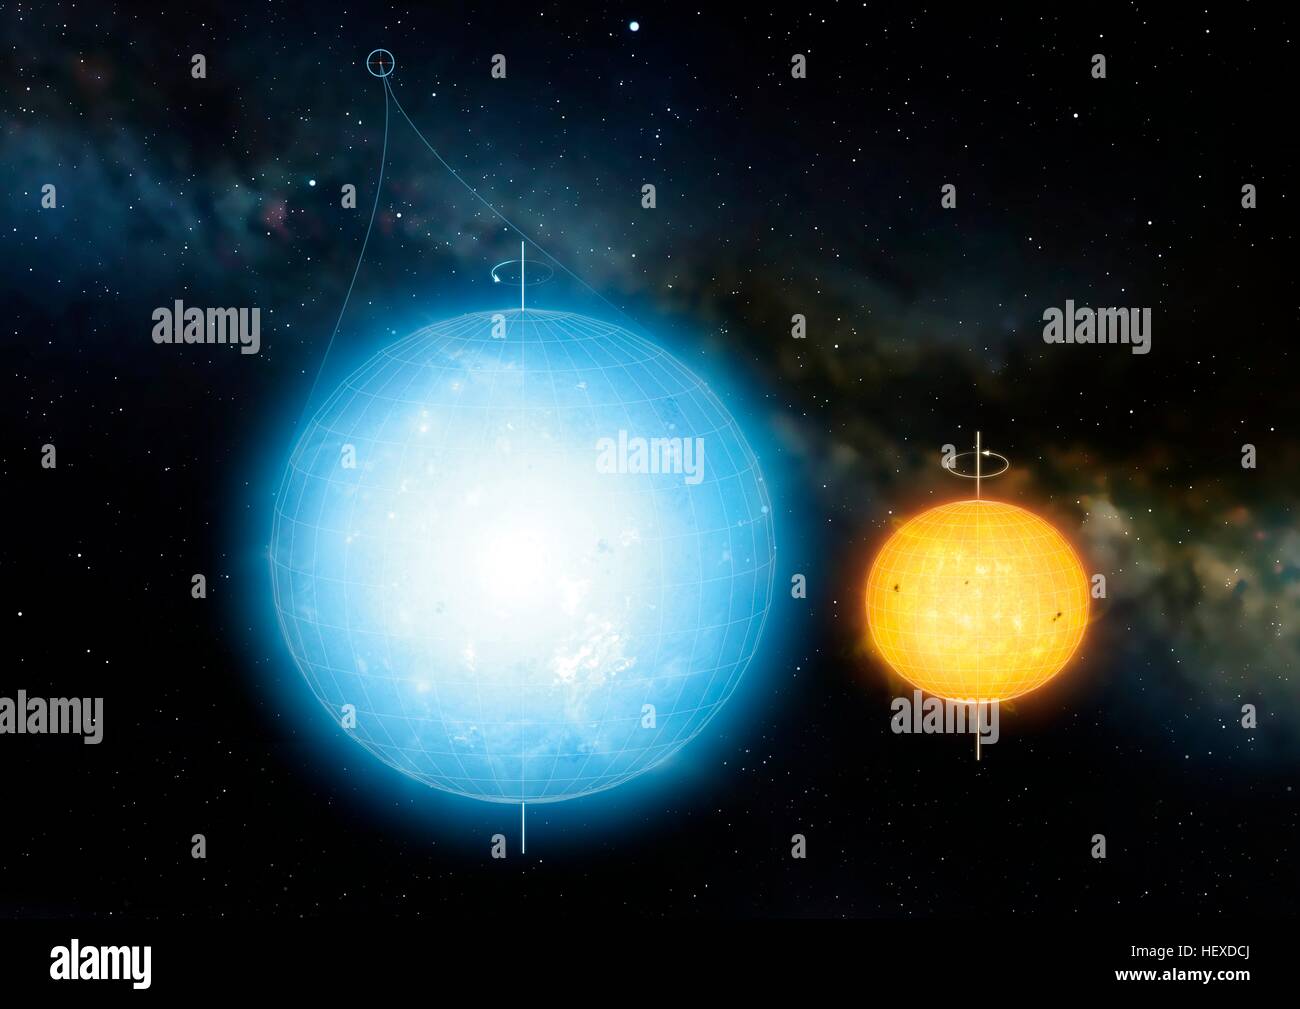 Kepler 11145123 is roundest known astronomical body.All astronomical bodies,including Earth Sun,are slightly oblate they bulge at equator because of their spin.However,Kepler 11145123 has such small degree of flattening that astronomers have concluded that it's closer to true sphere than any other Stock Photo